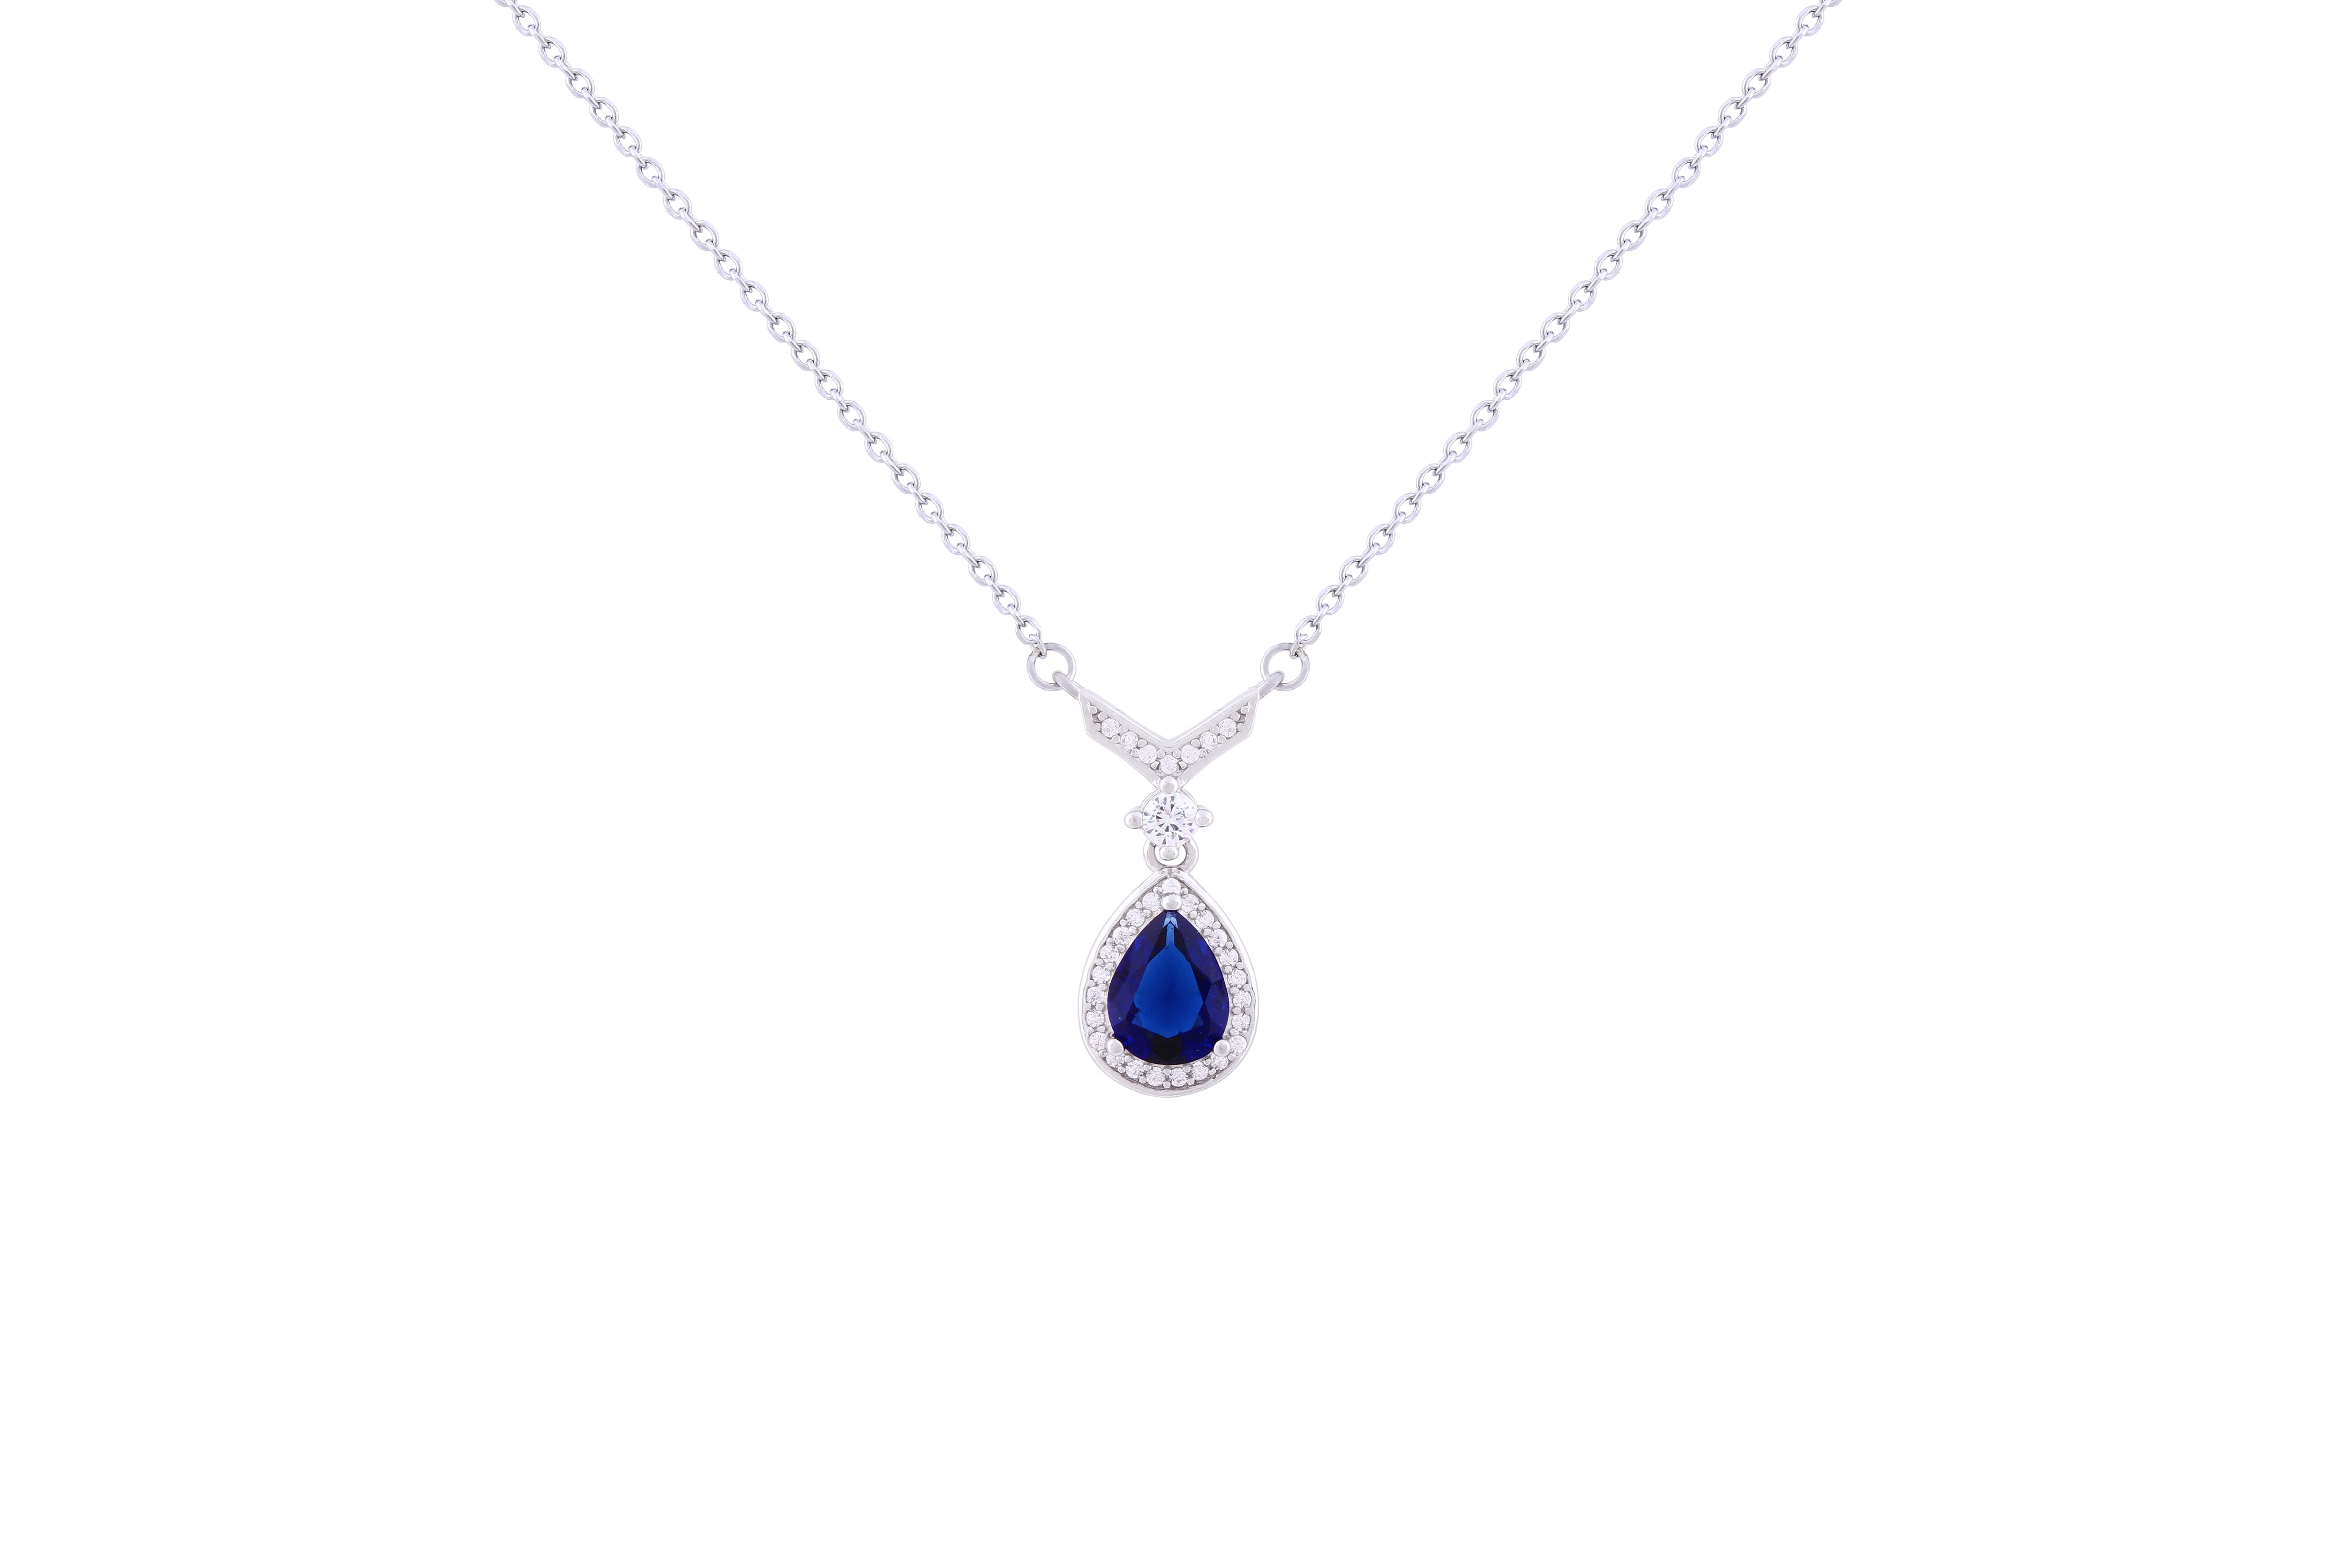 Asfour 925 Sterling Silver Necklace With Blue Pear Pendant NR0498-B